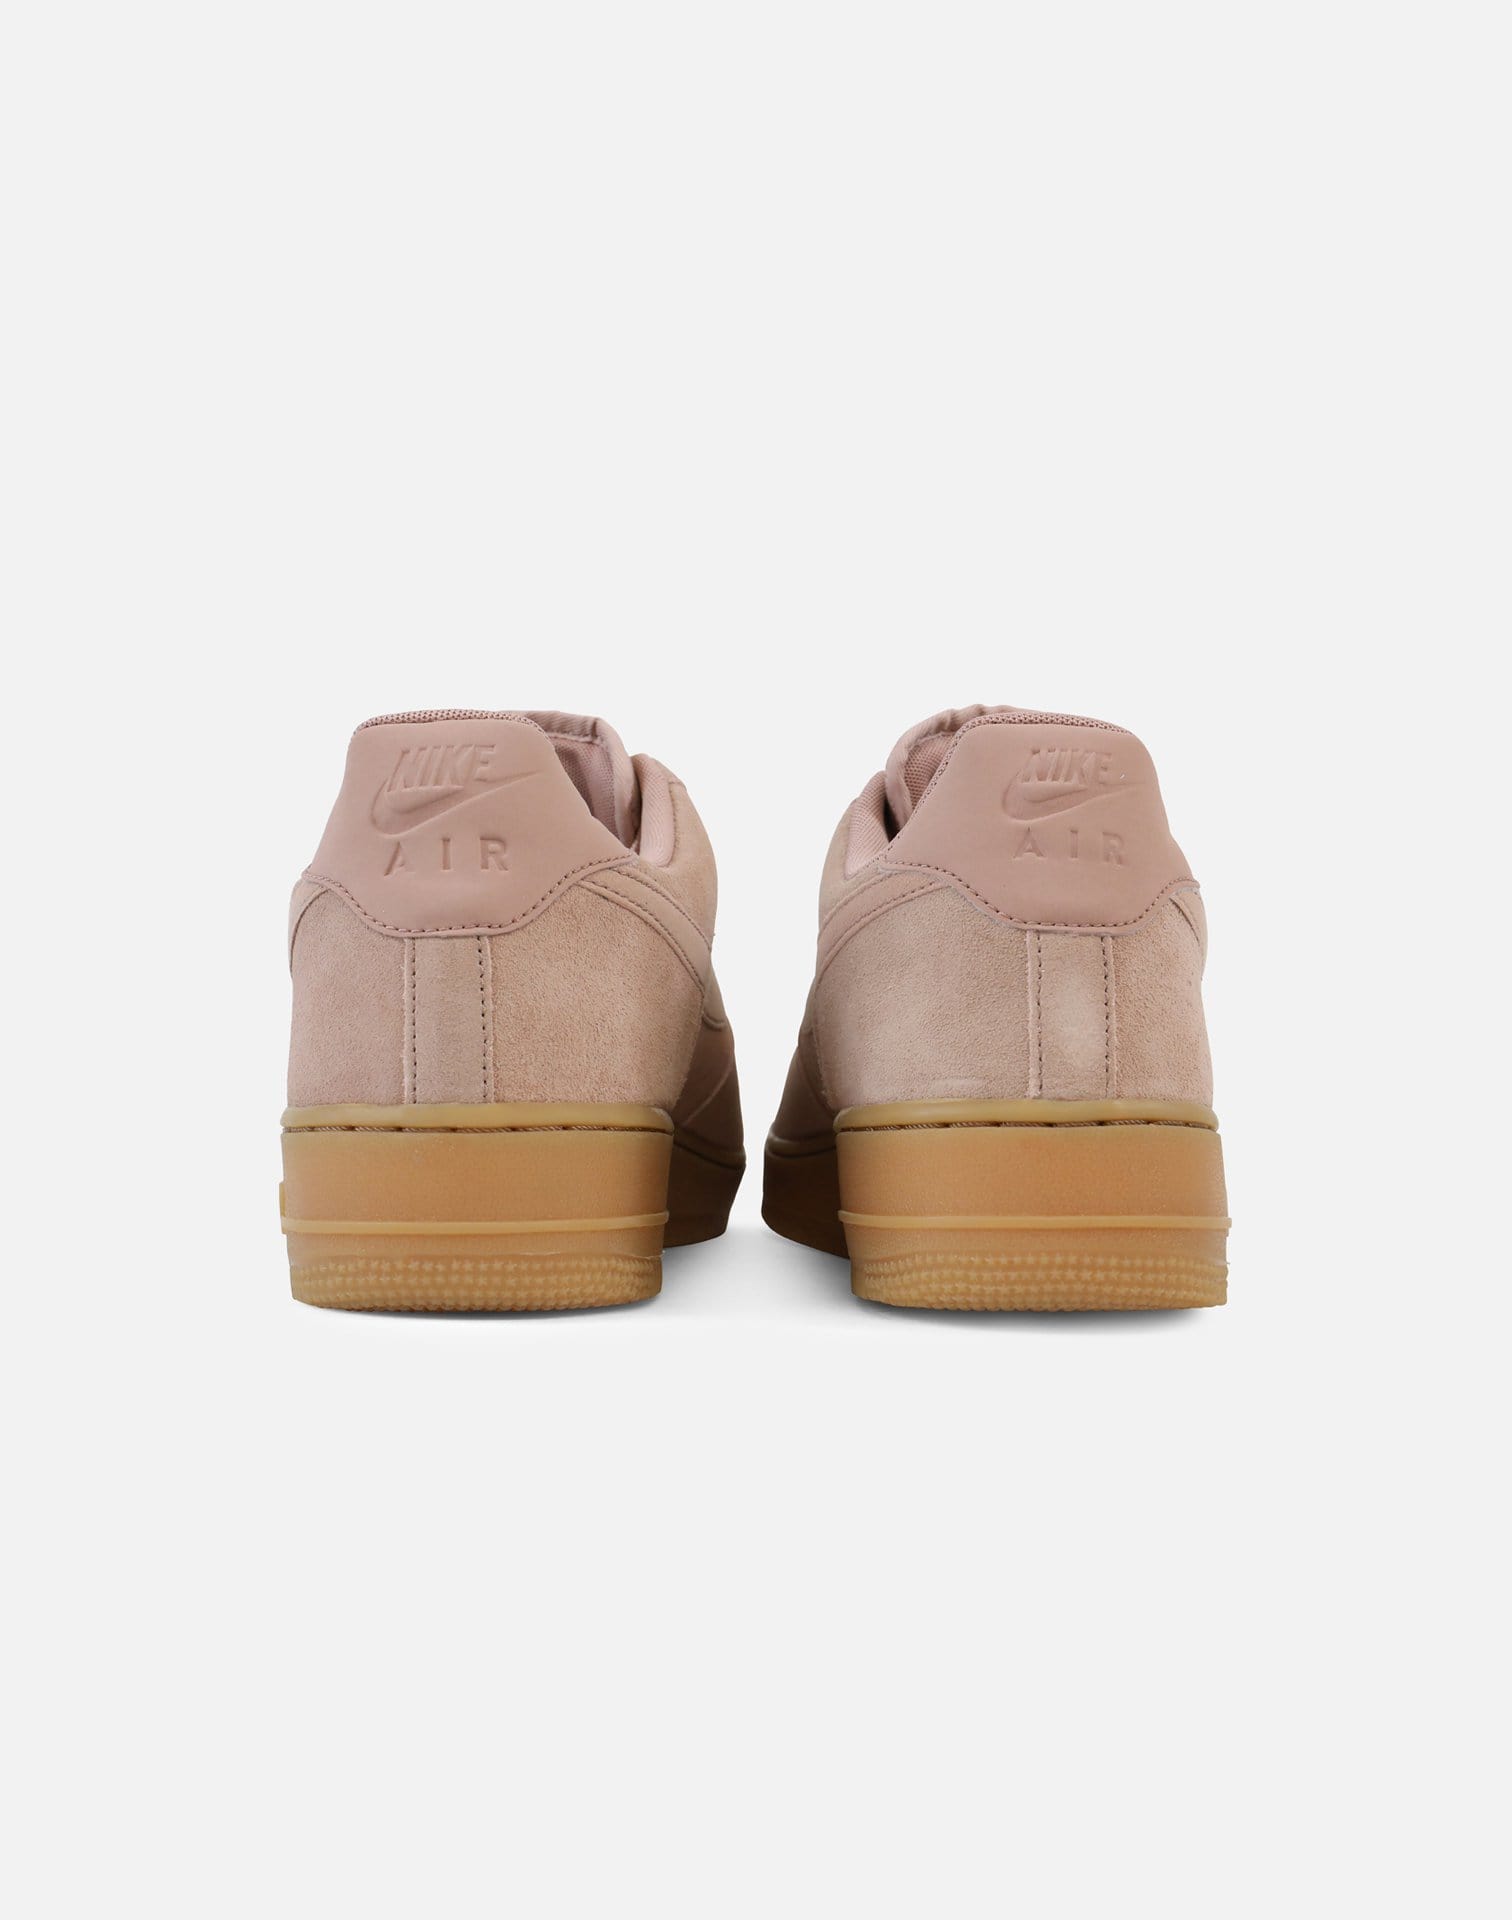 Nike Air Force 1 '07 LV8 Suede (Particle Pink/Particle Pink)